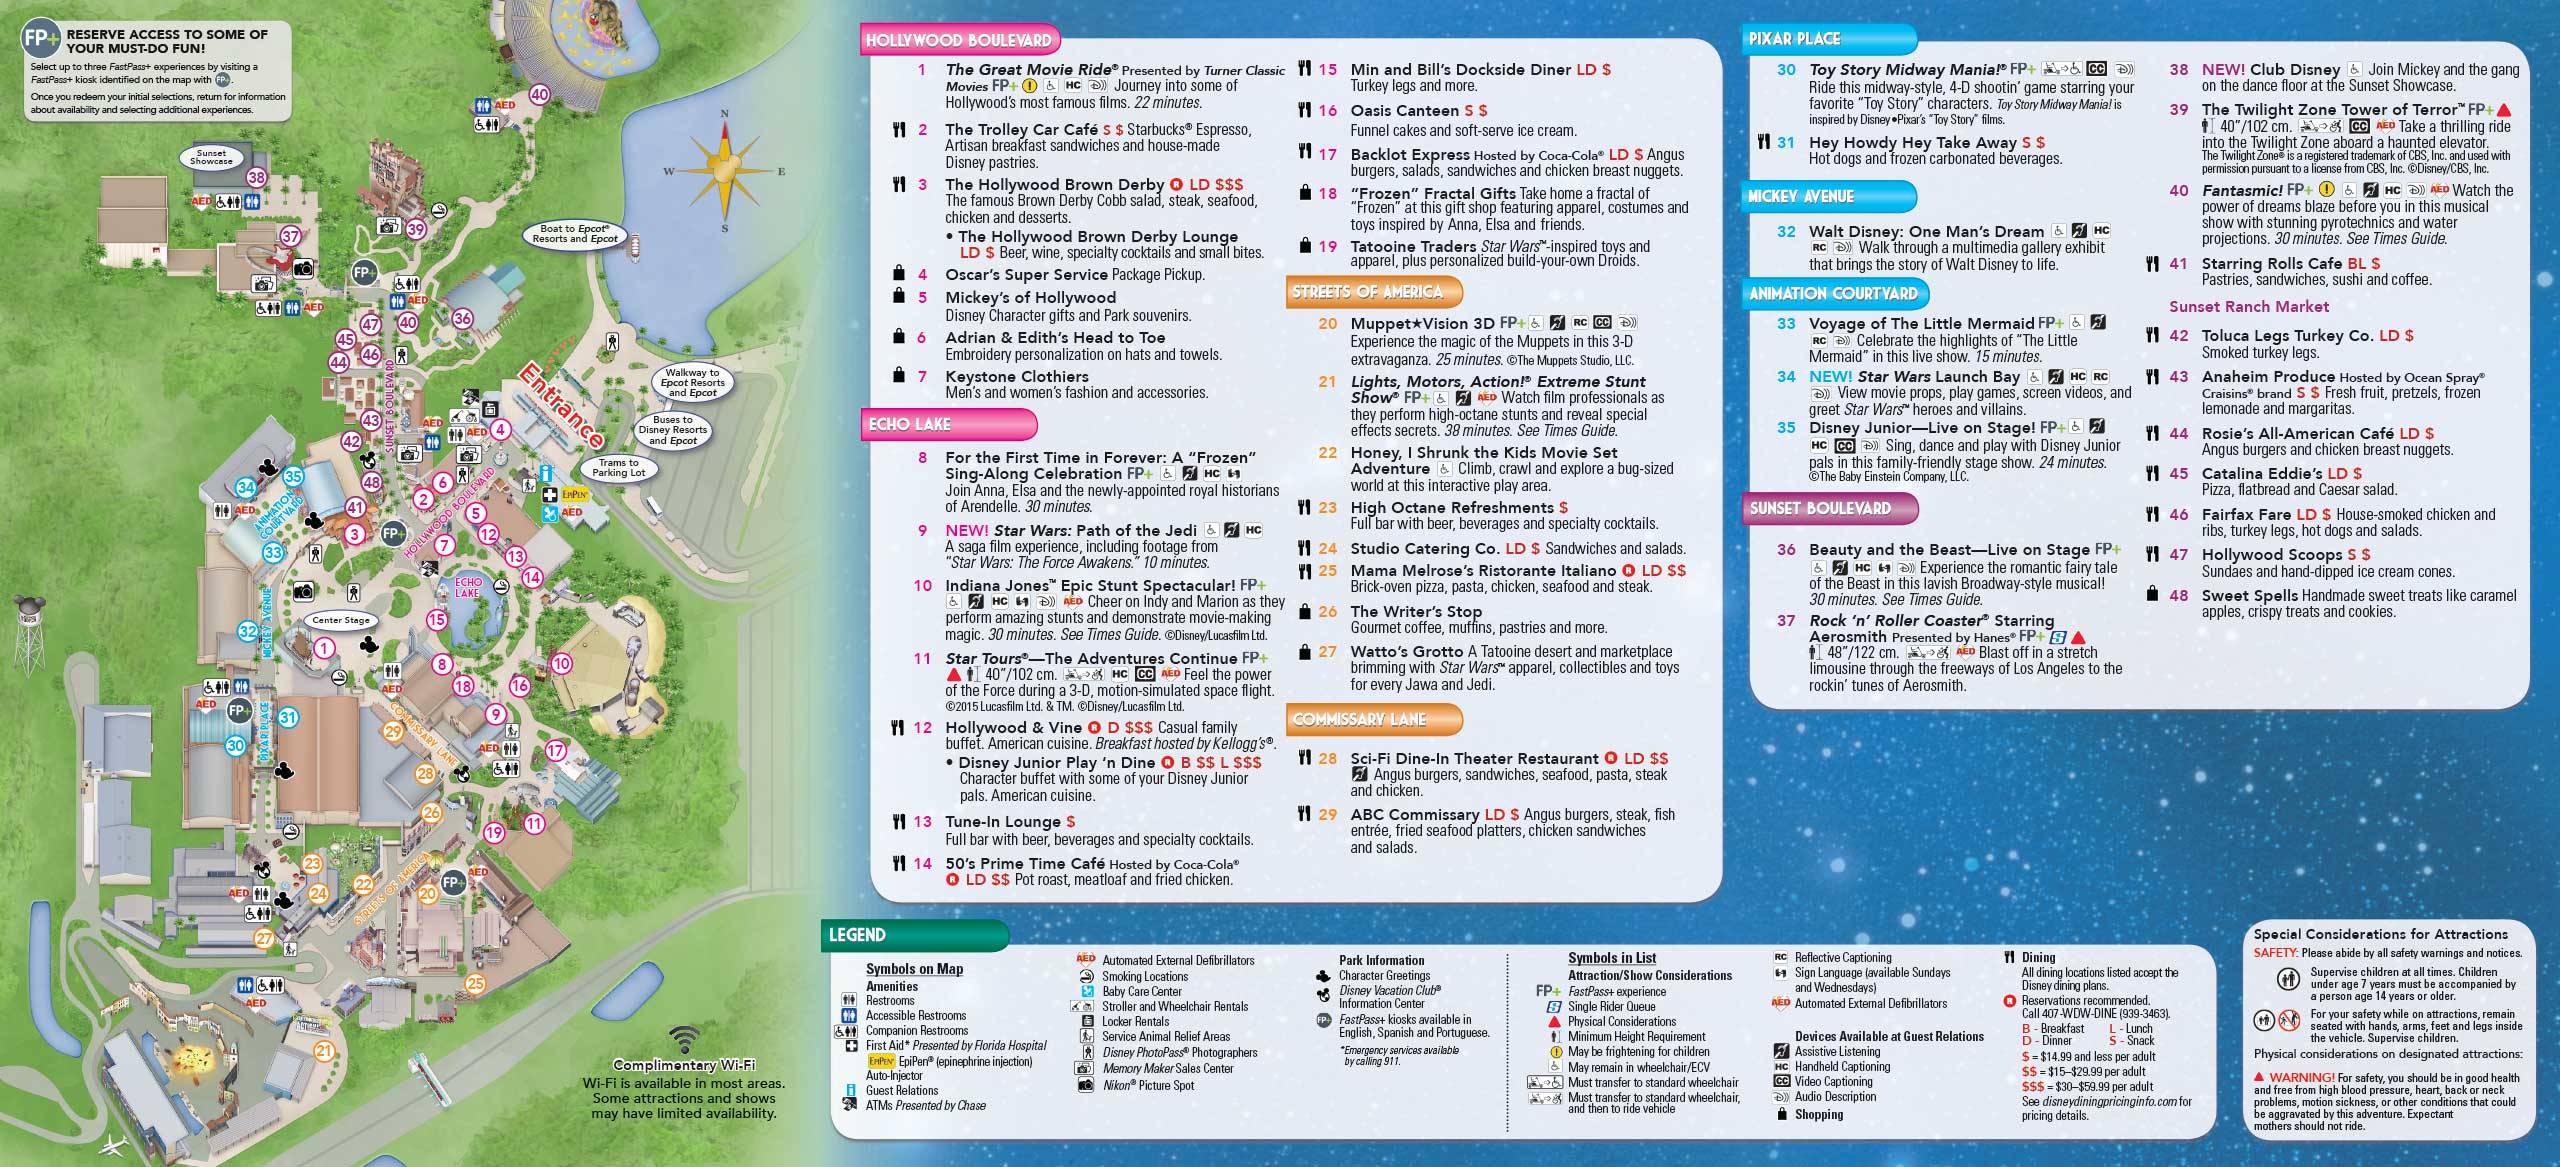 30th Anniversary Of Disney's Hollywood Studios Fold Out Map